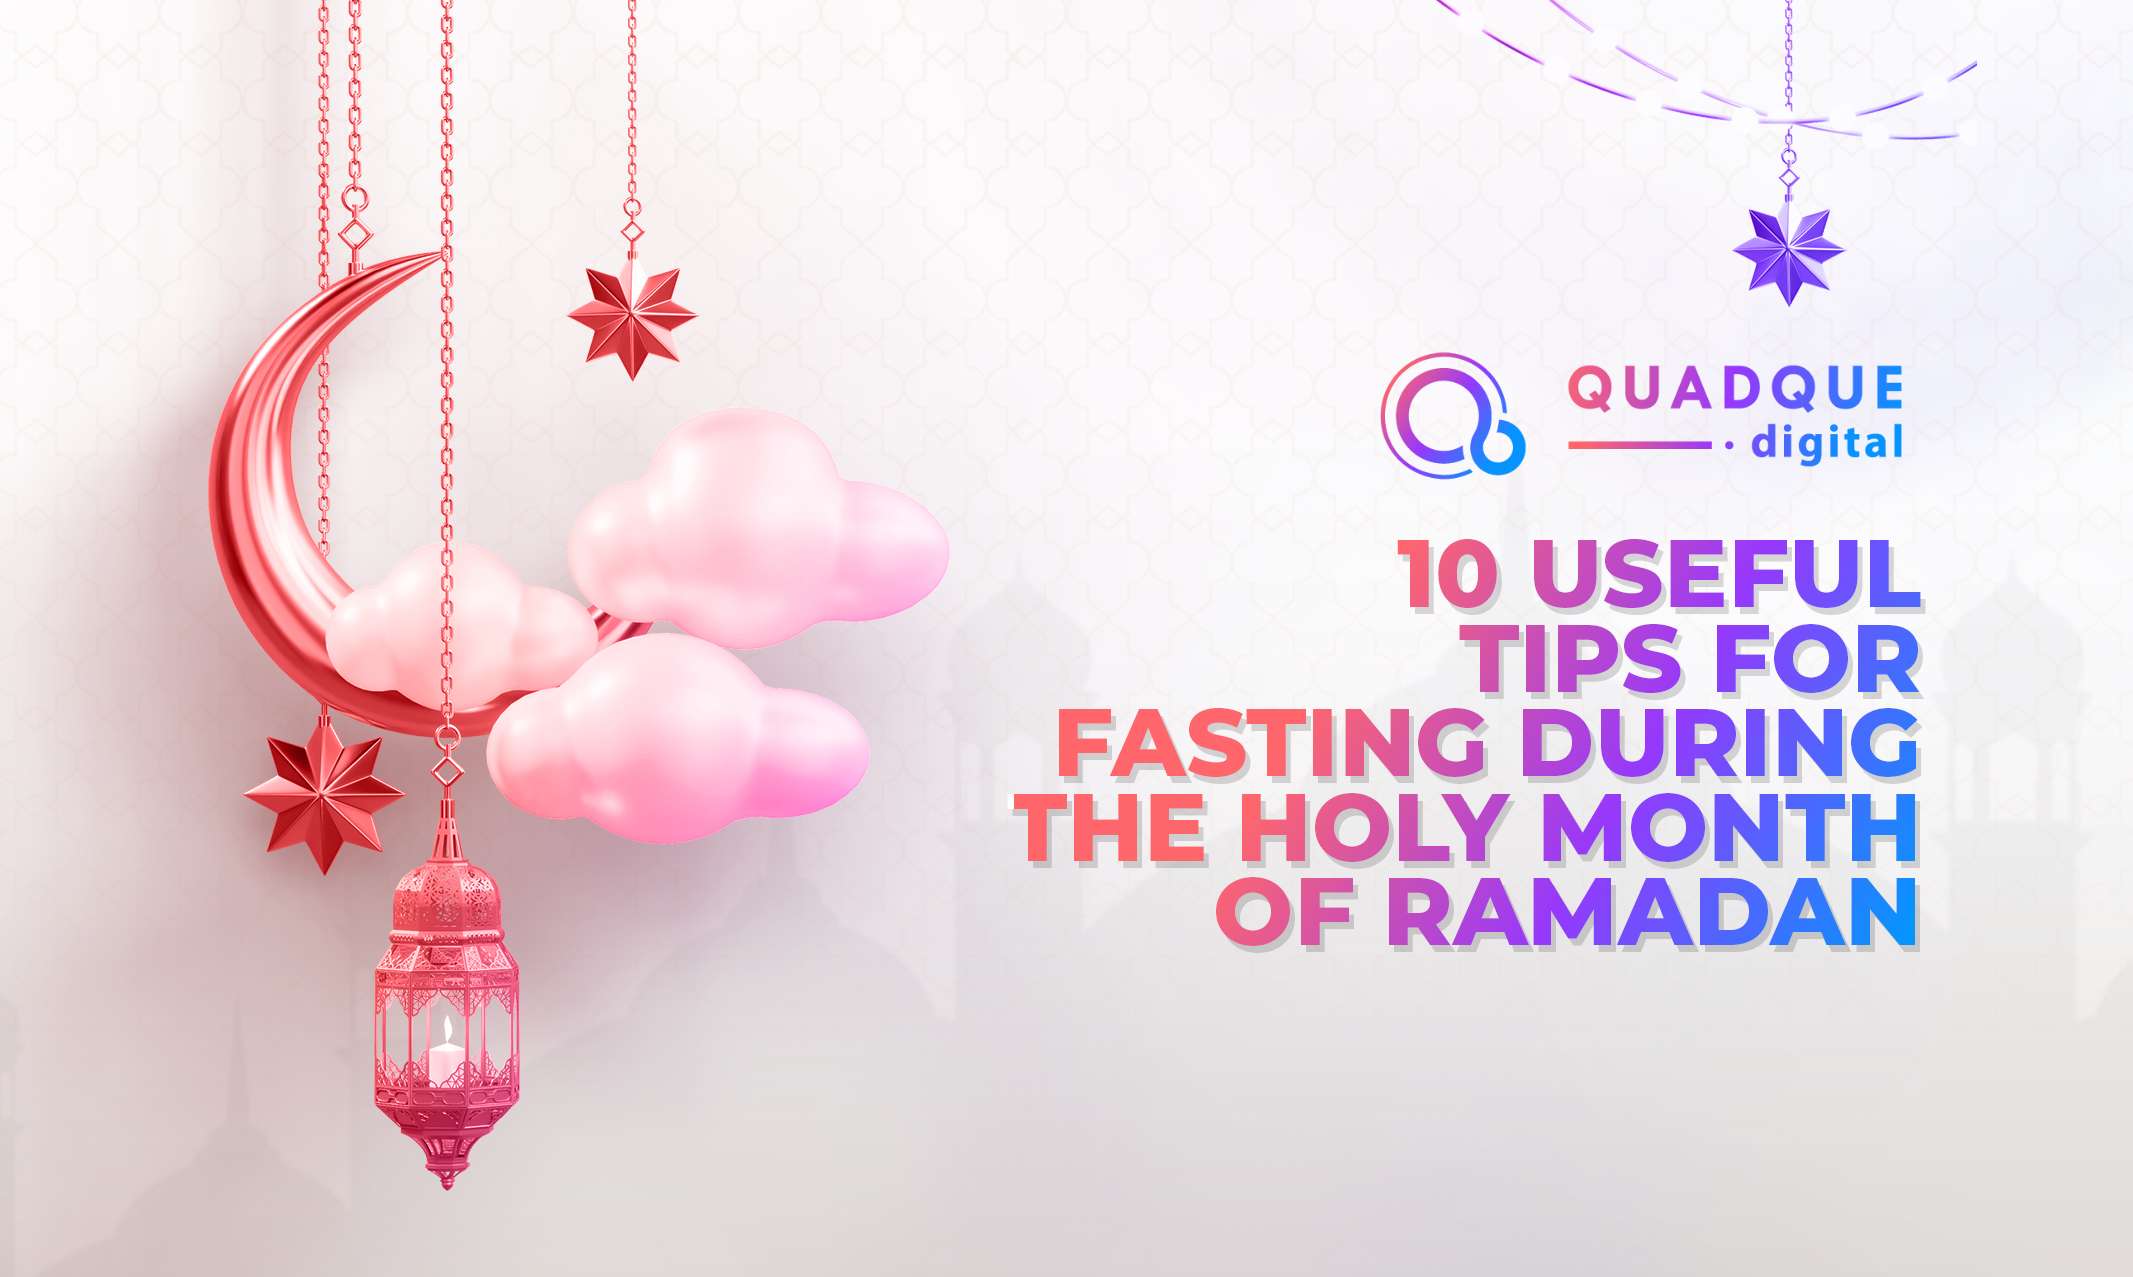 10 Useful Tips for Fasting During the Holy Month of Ramadan